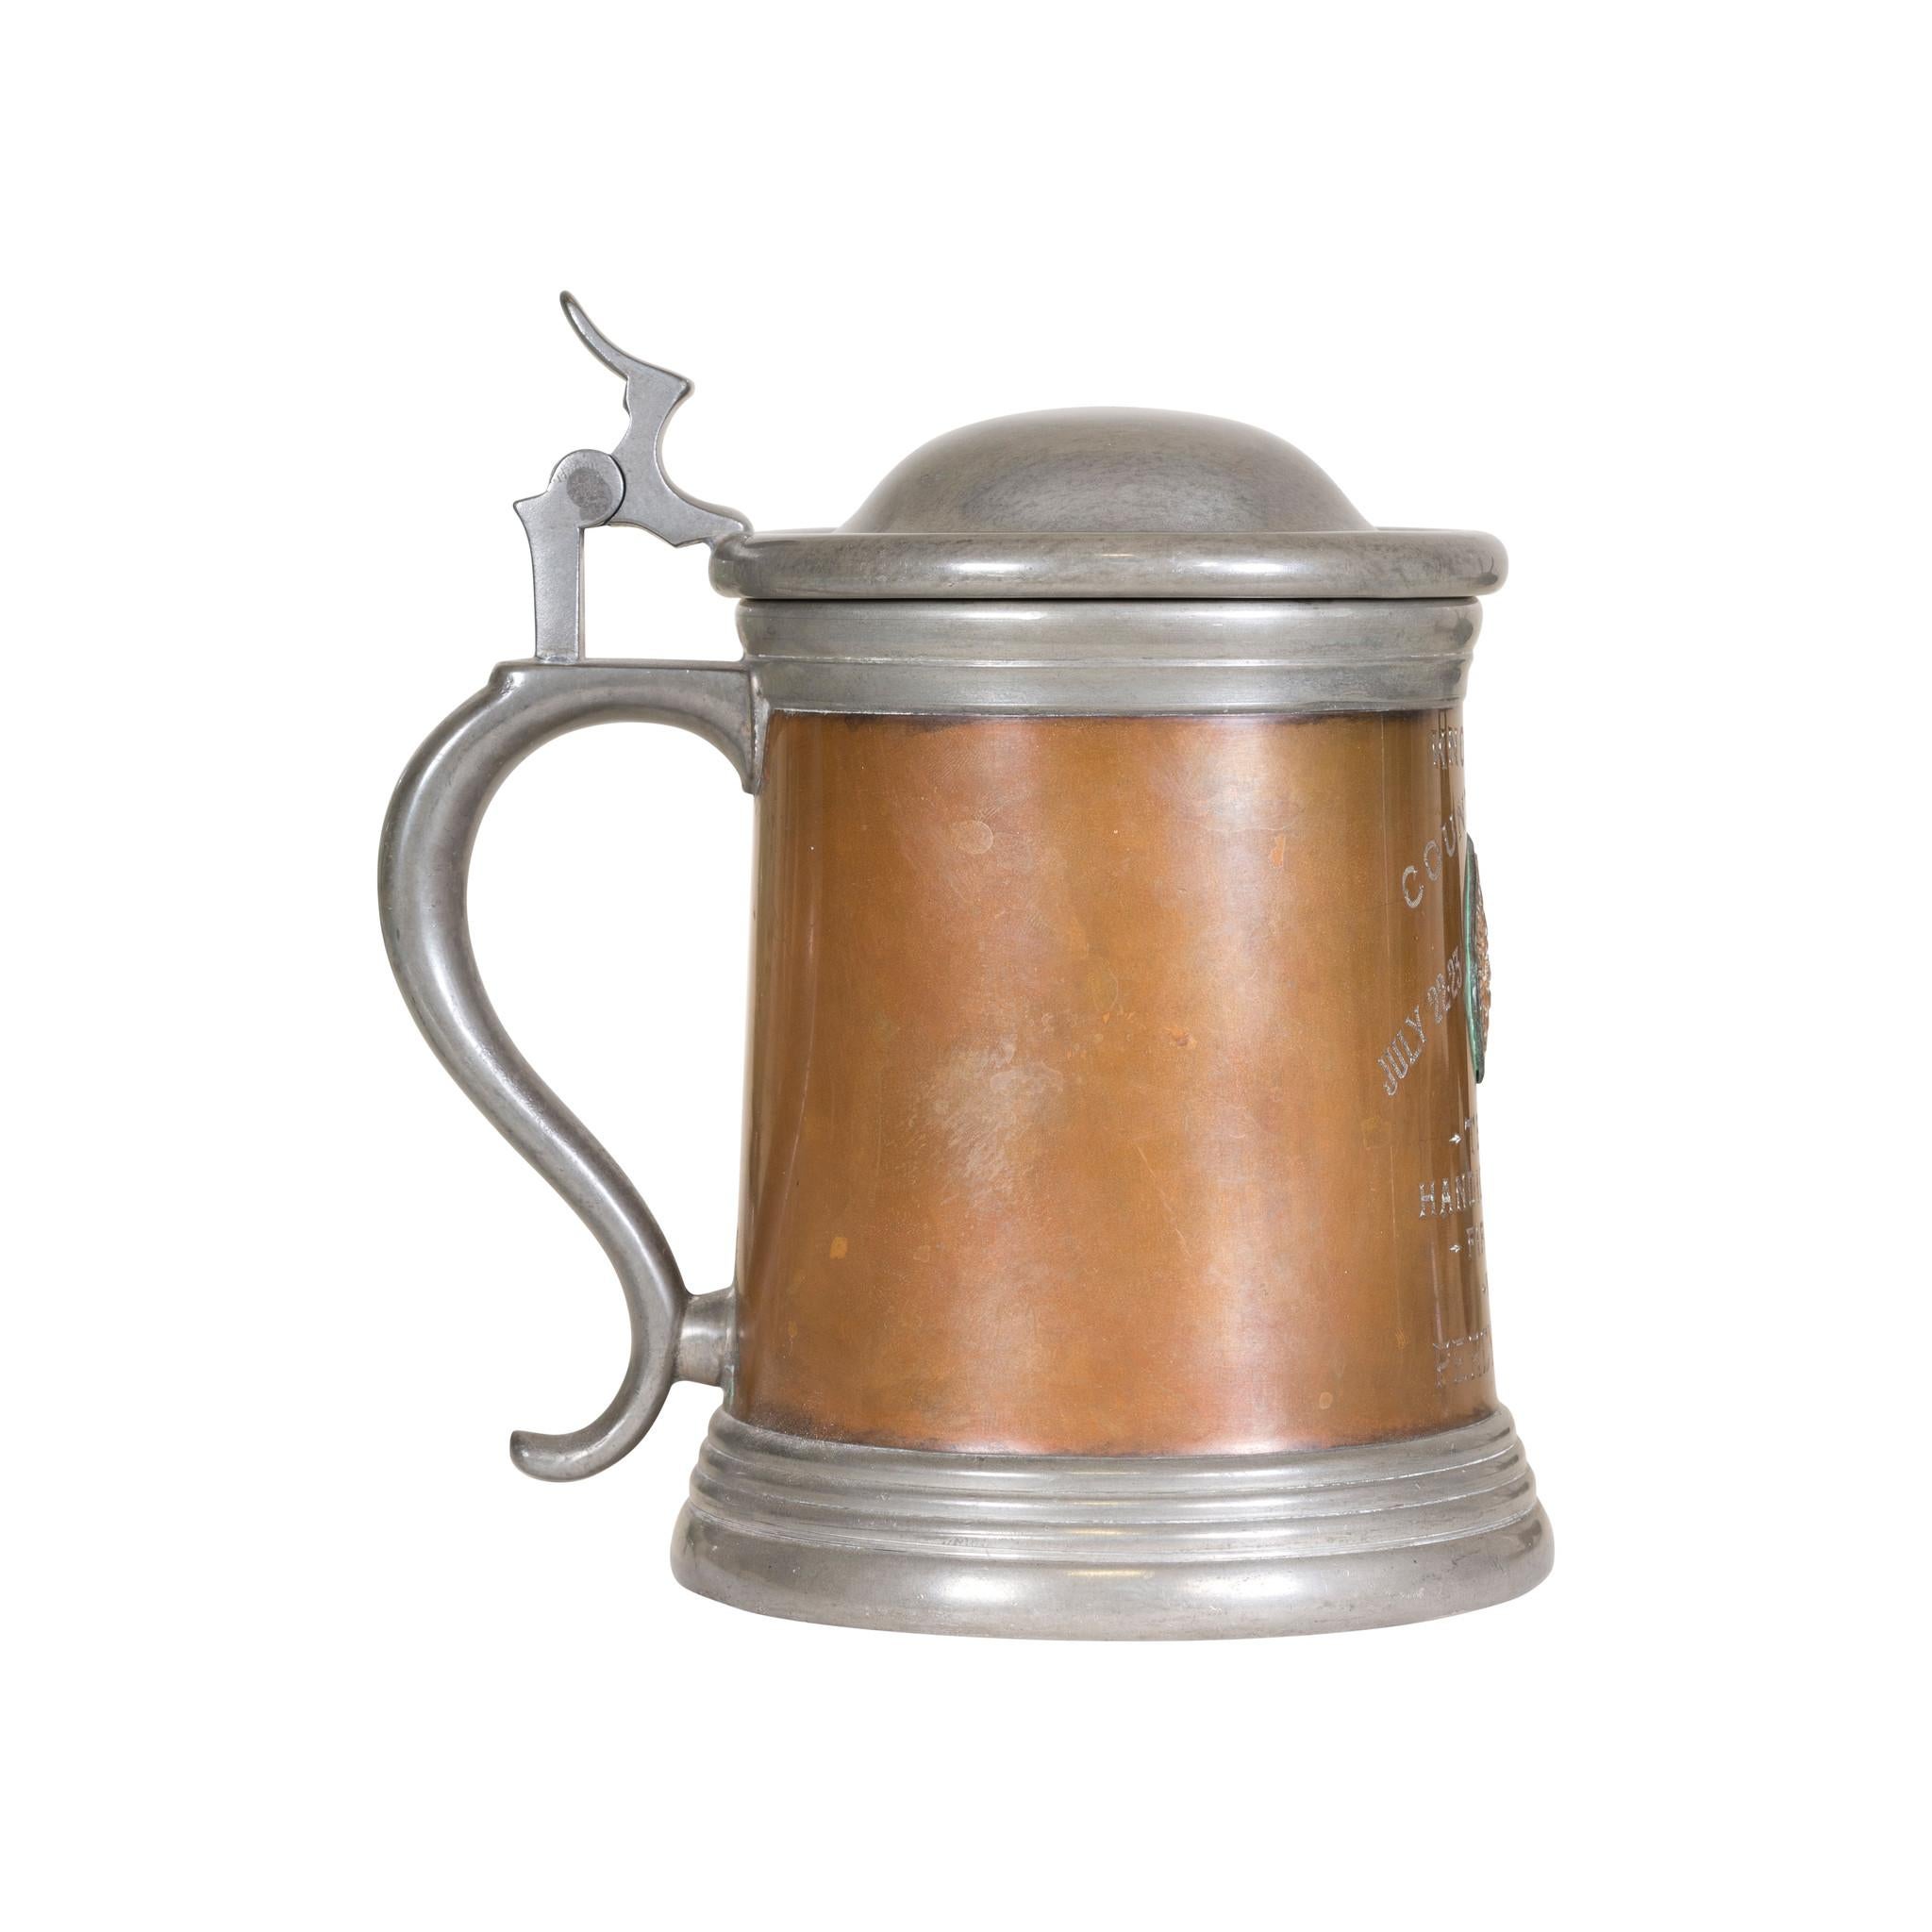 1905 Tennis Stein In Good Condition For Sale In Coeur d'Alene, ID